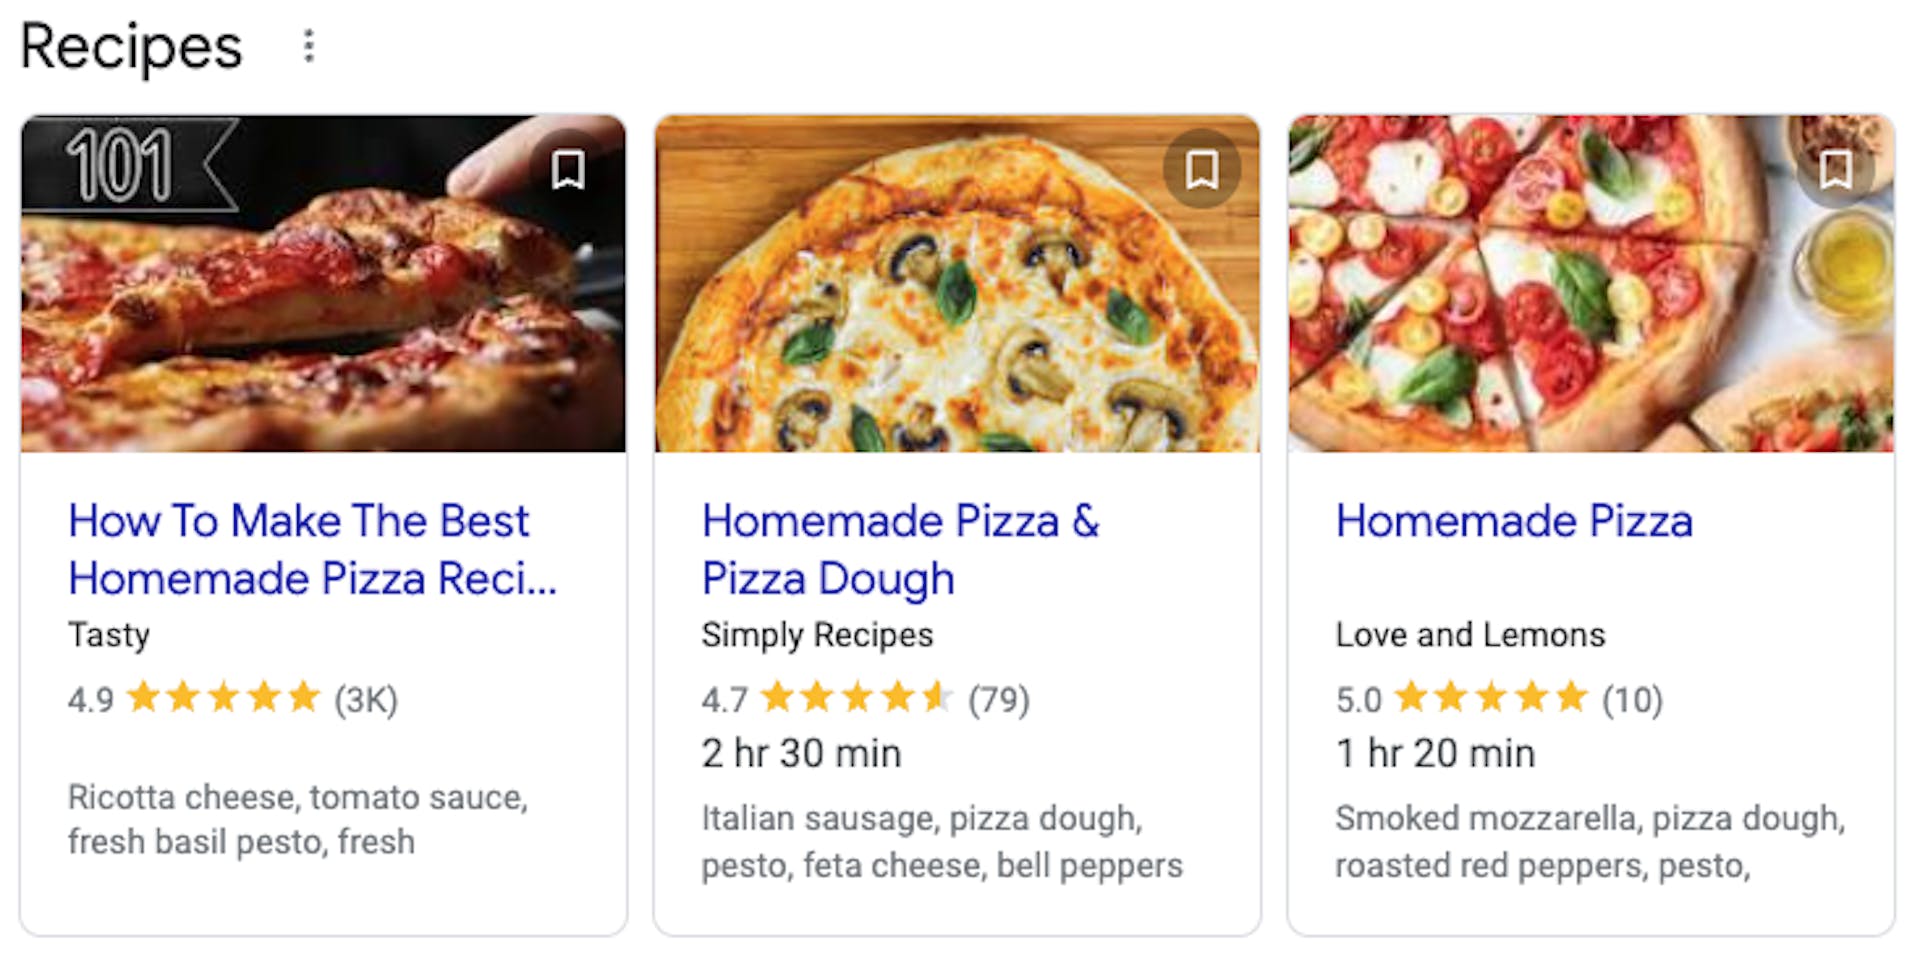 When a recipe blog post contains recipe structured data, Google can display it as a card in a "Recipes" carousel at the top of search results. Structured data can help Google understand things like how long it takes to make a recipe and then display that information on the card.